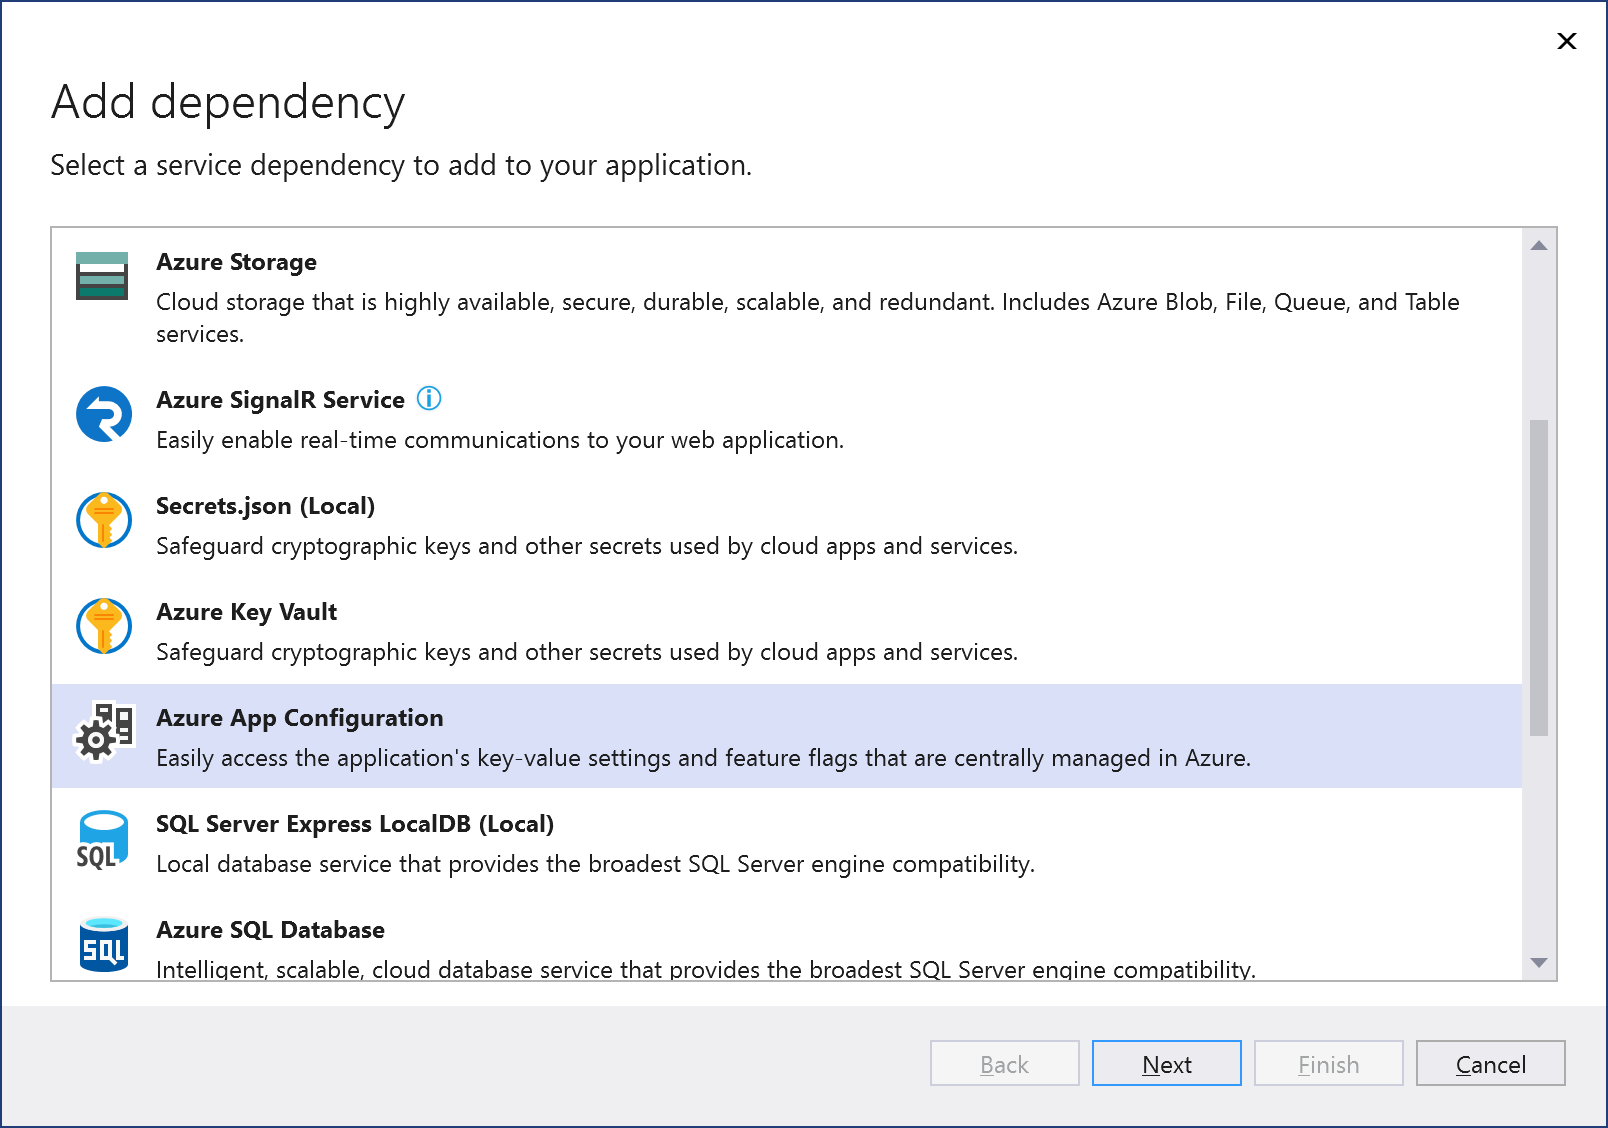 Manage your configurations with Azure App Configuration